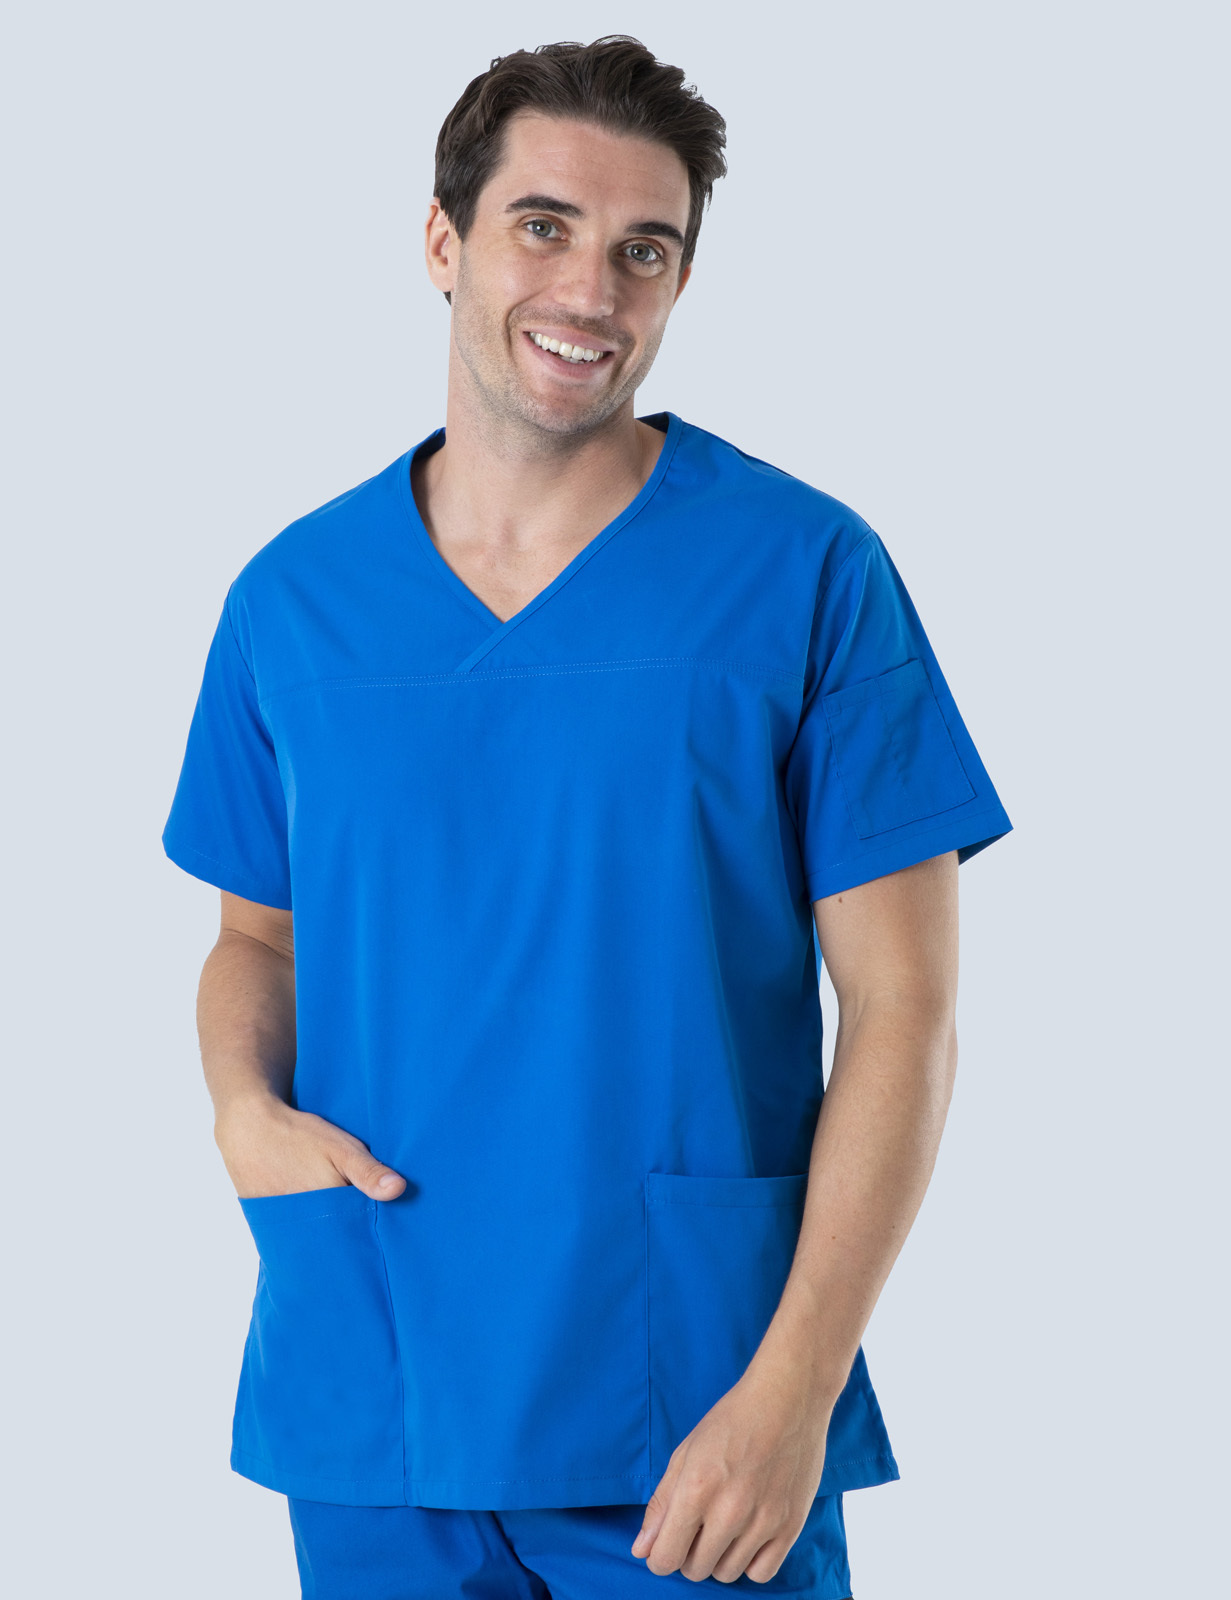 Men's Fit Solid Scrub Top - Royal - 3X Large